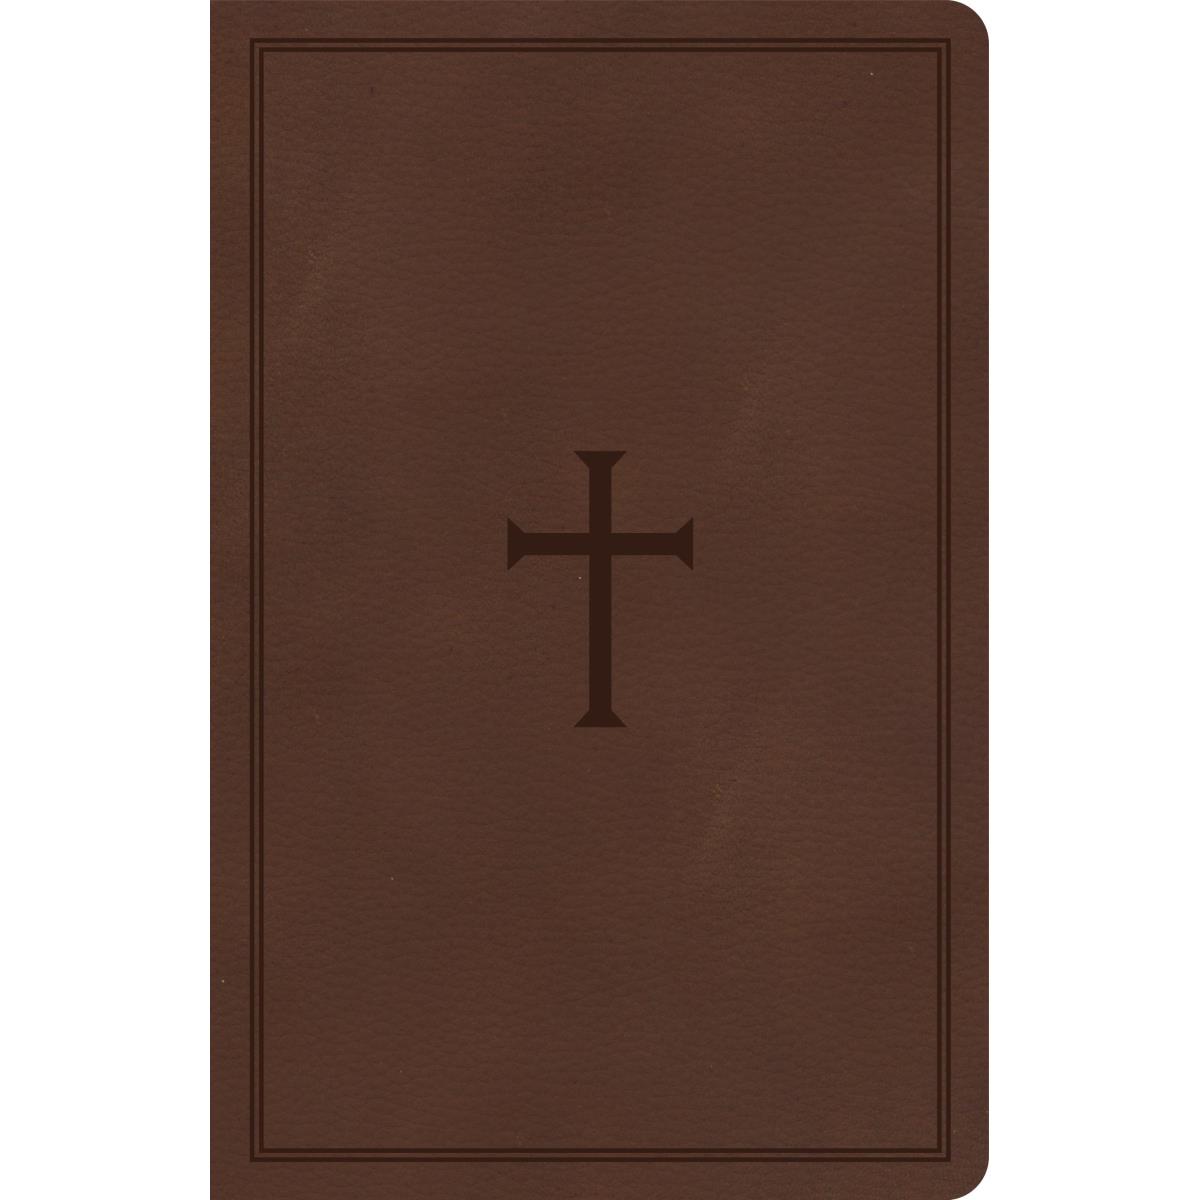 Picture of B&H Publishing 204357 KJV Thinline LeatherTouch Bible - Brown